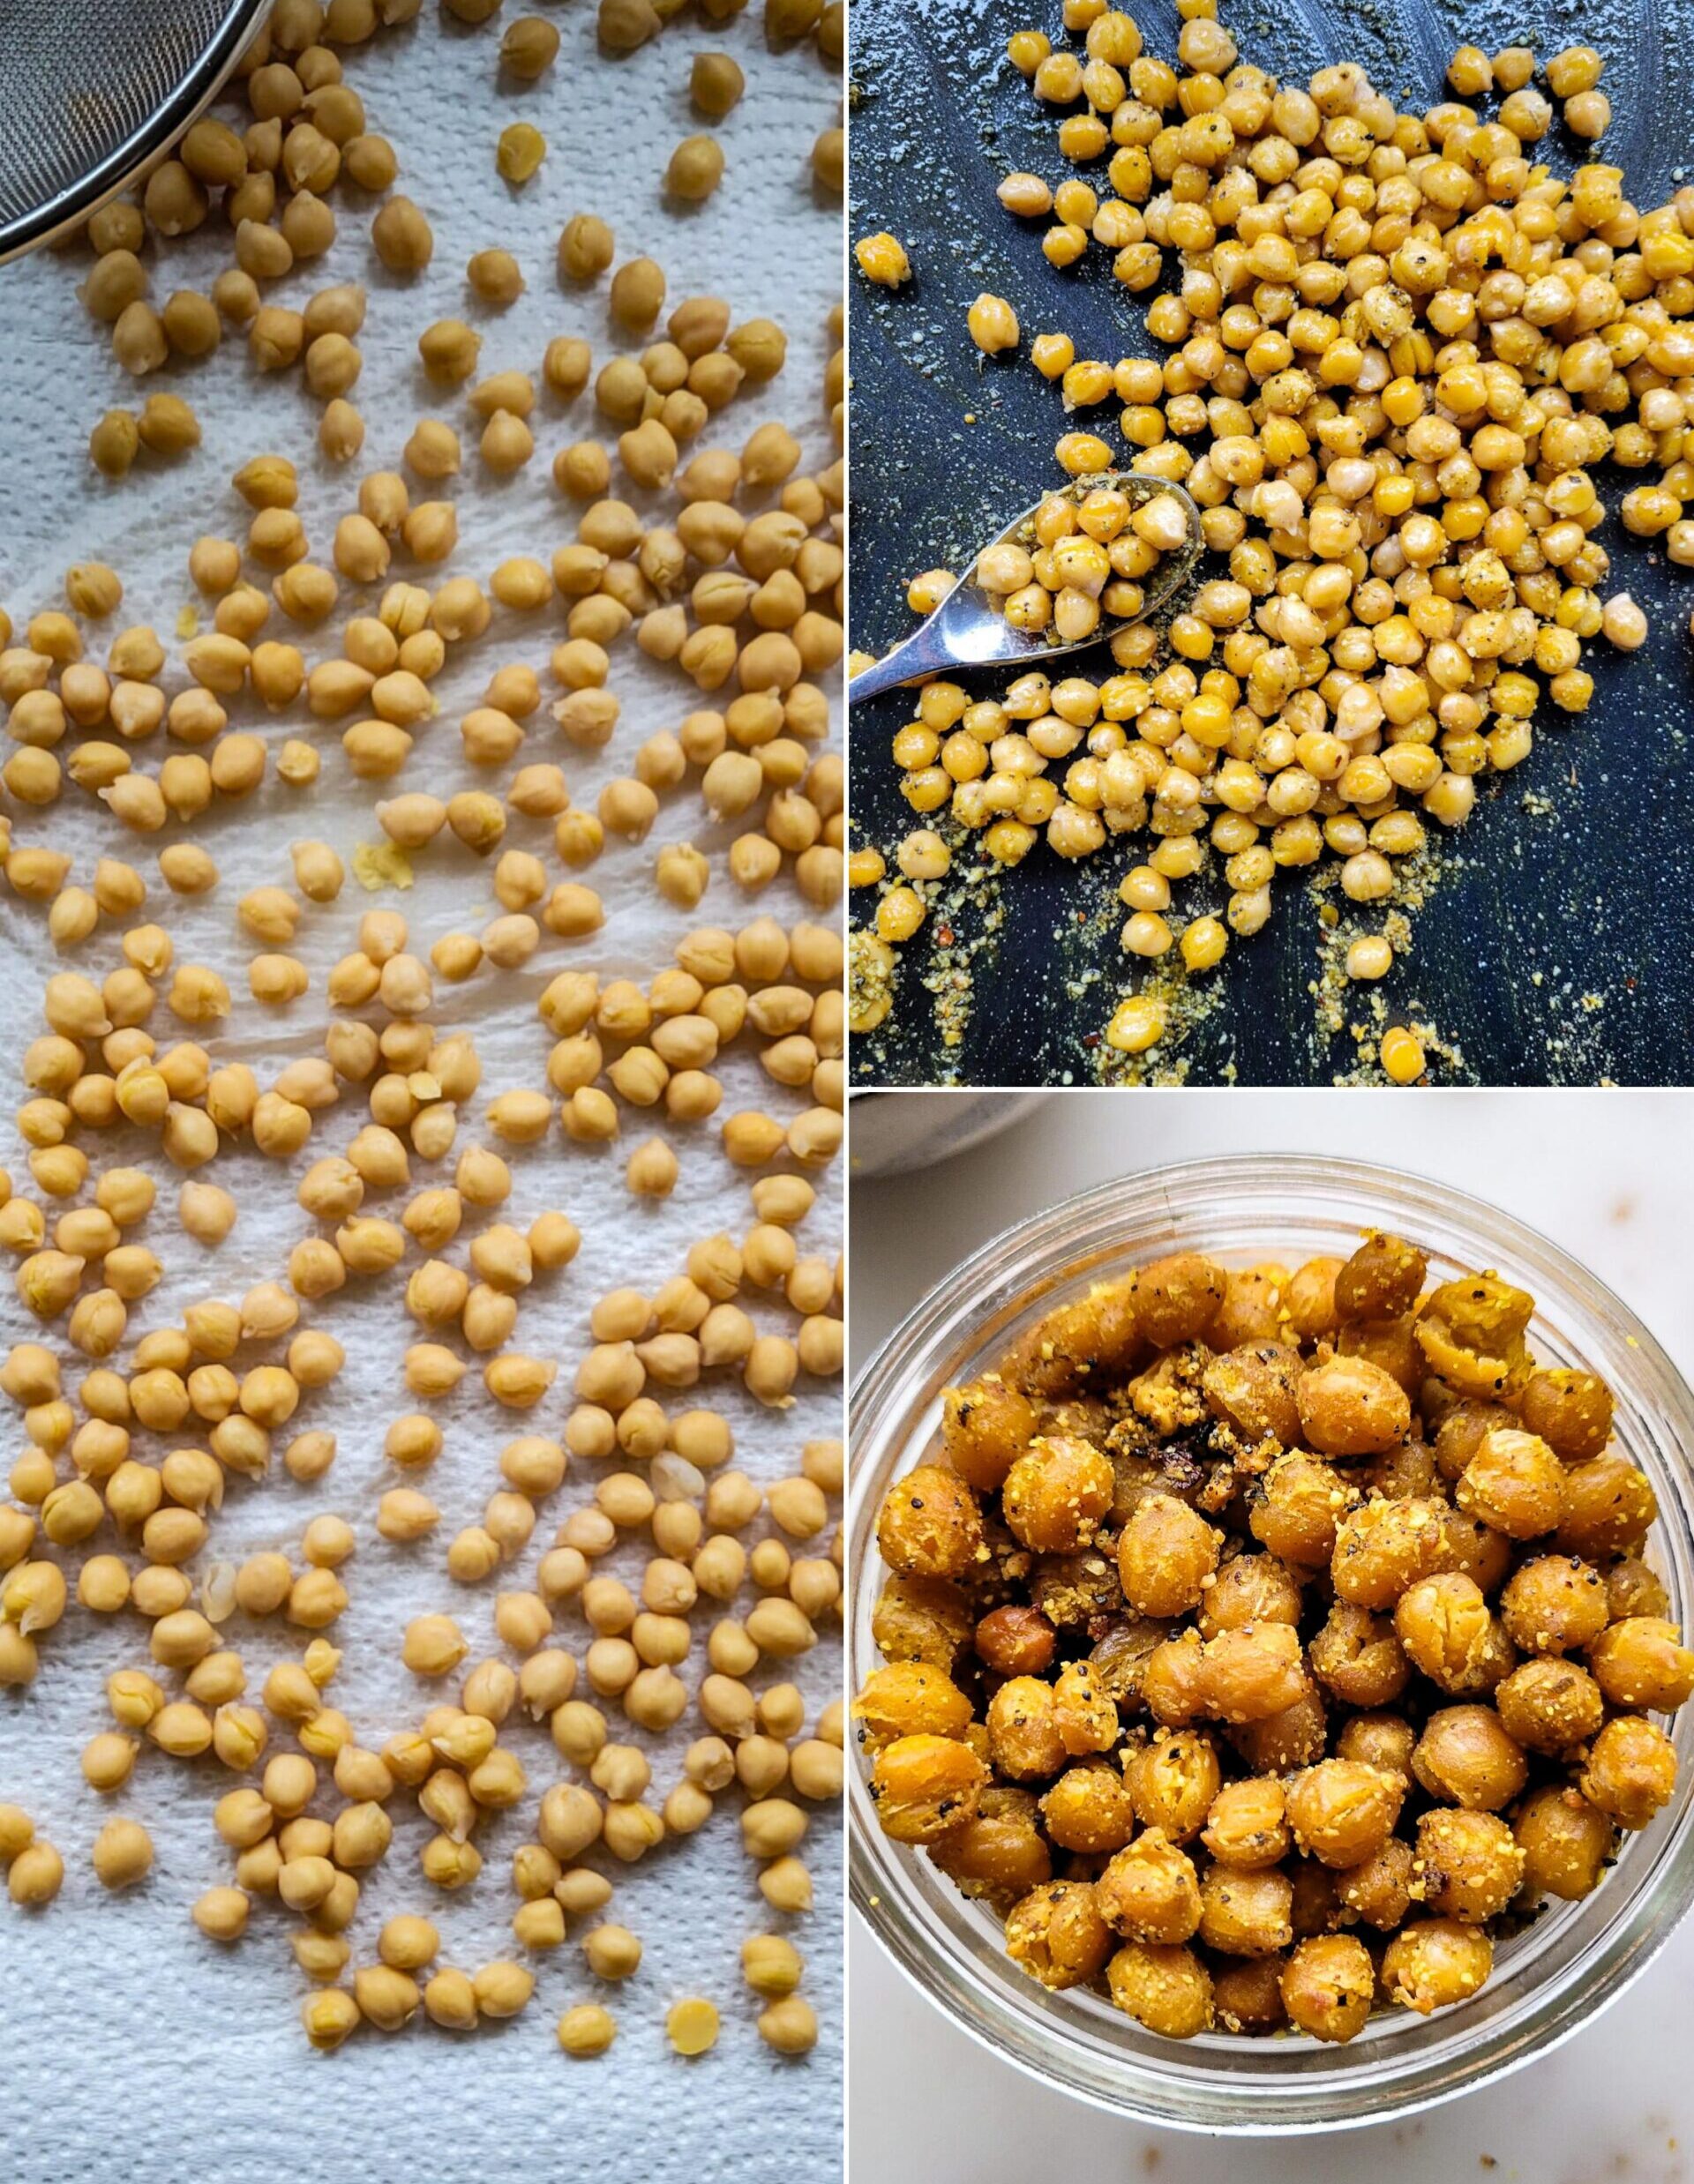 Collage showing the roasting of Dukka Roasted Chickpeas